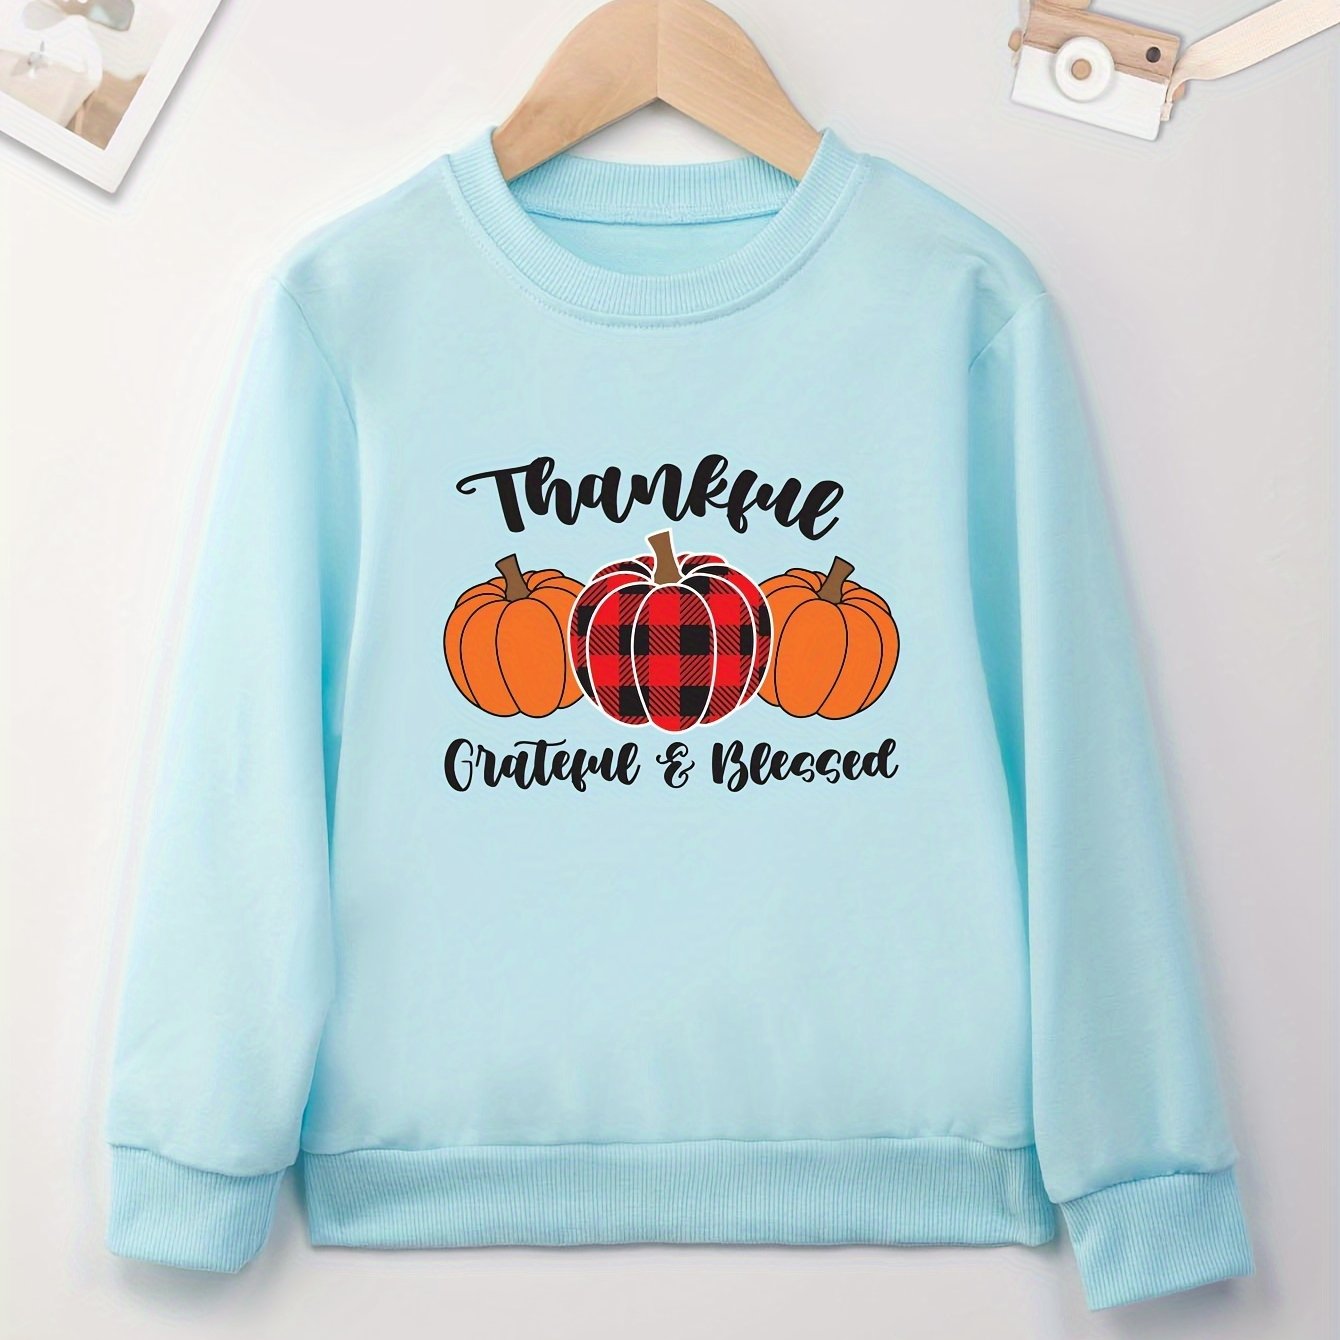 Thankful GRATEFUL&BLESSED (thanksgiving themed) Youth Christian Pullover Sweatshirt claimedbygoddesigns